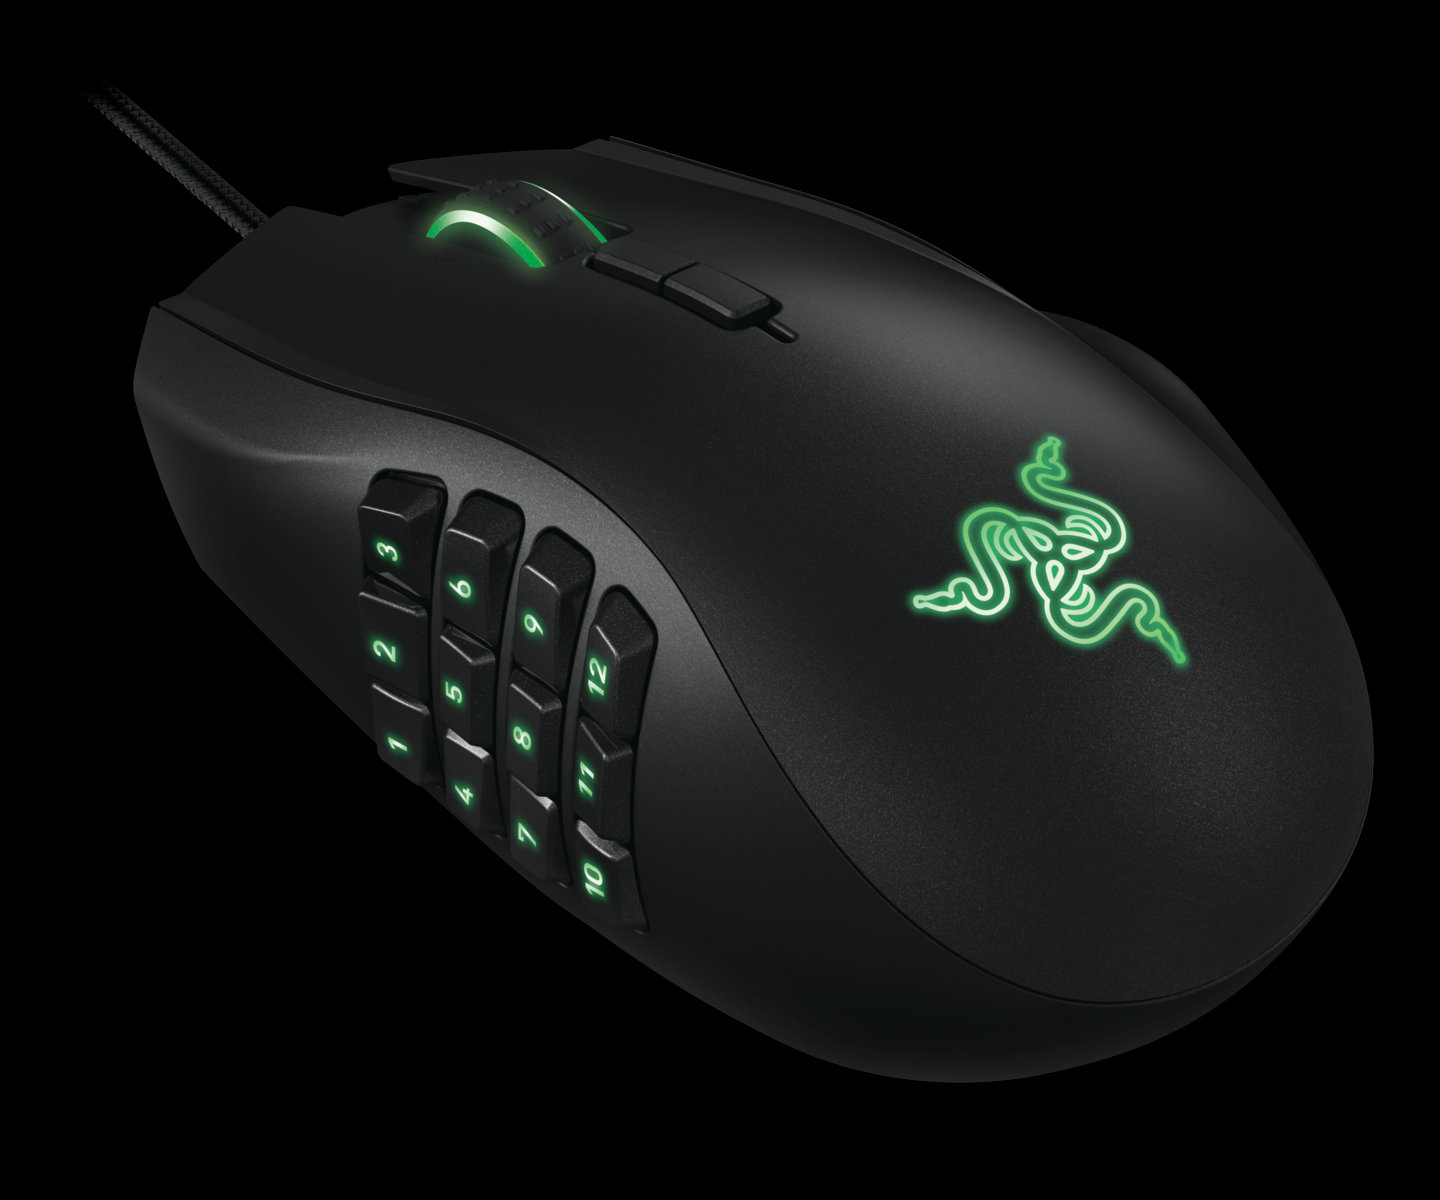 Razer Improves Naga MMO Gaming Mouse with 2014 Edition